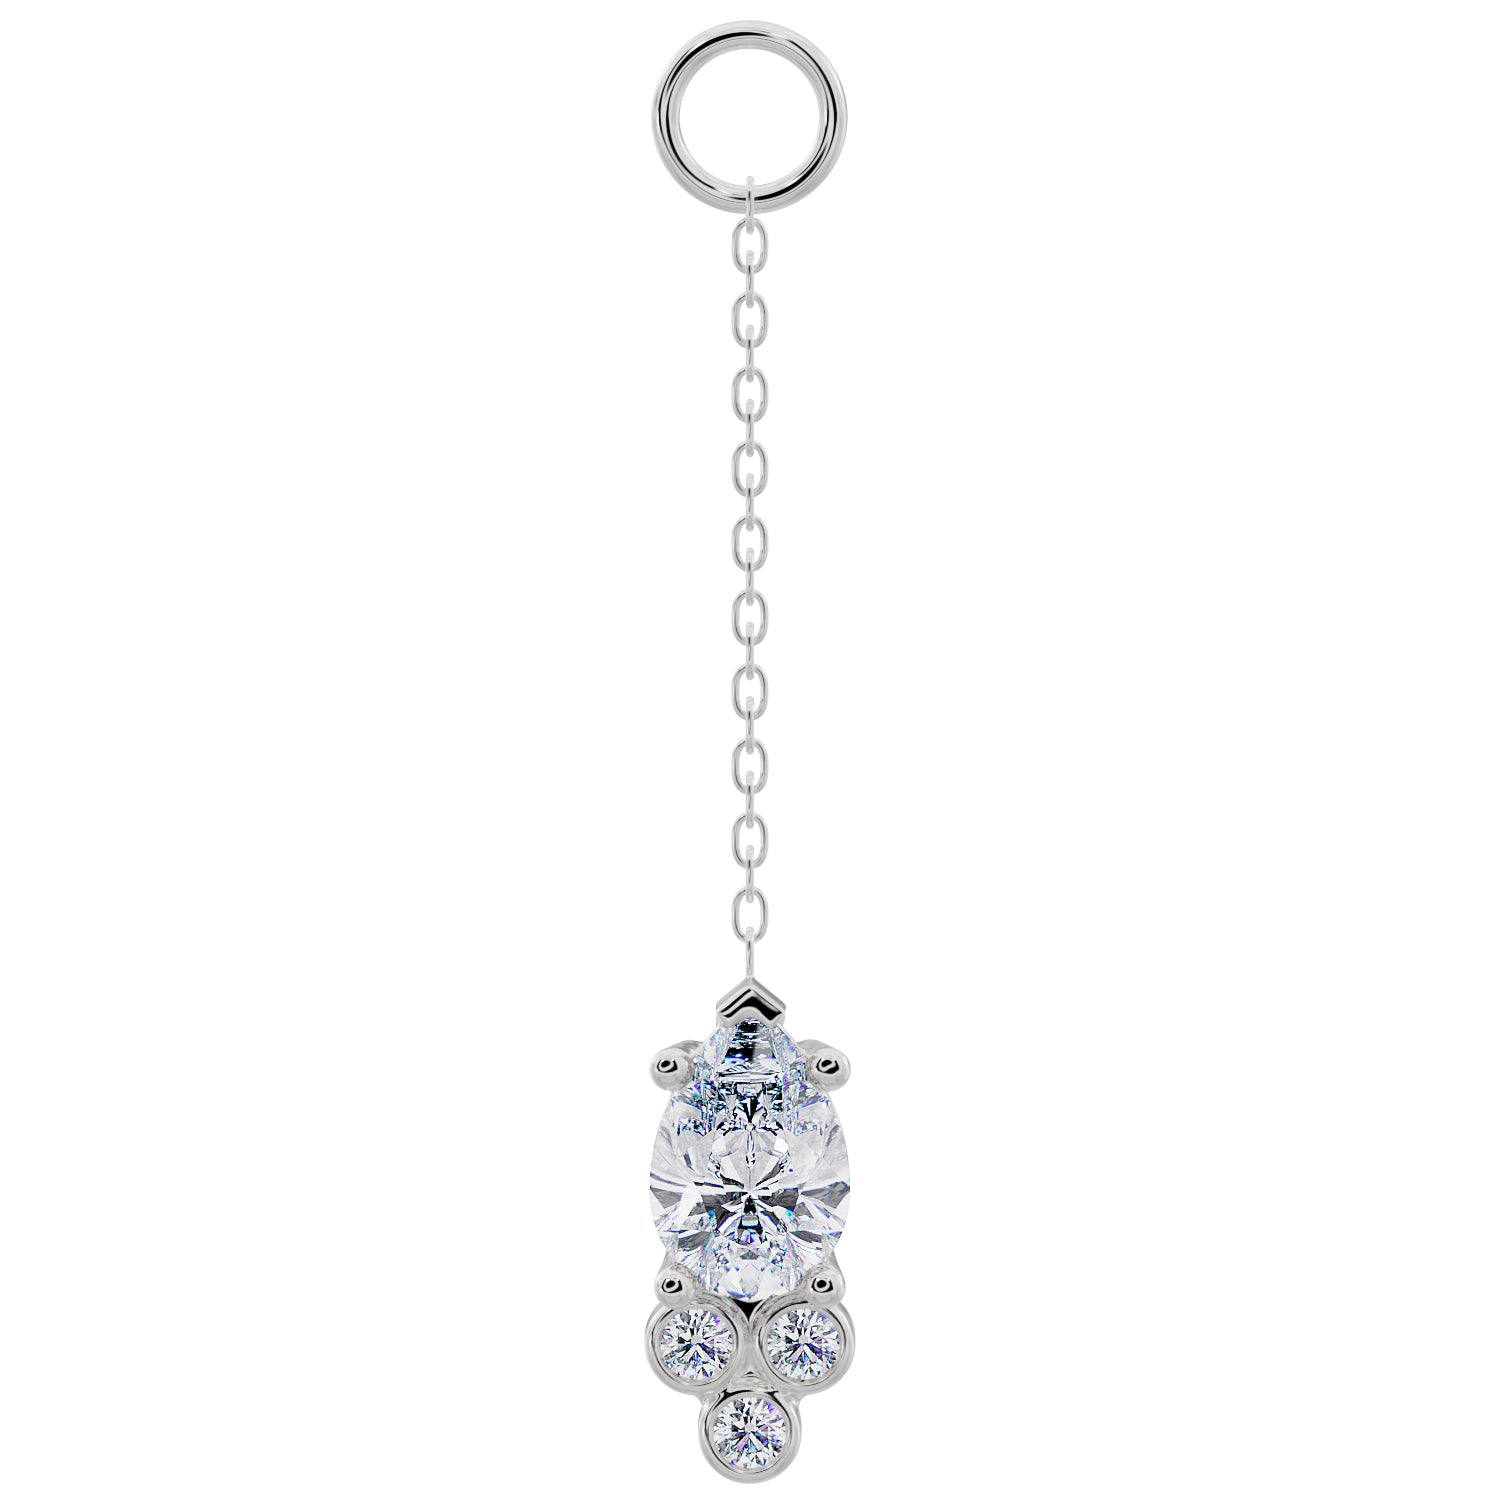 Pear with Tiny Diamonds Chain Accessory-Cubic Zirconia   Long   950 Platinum